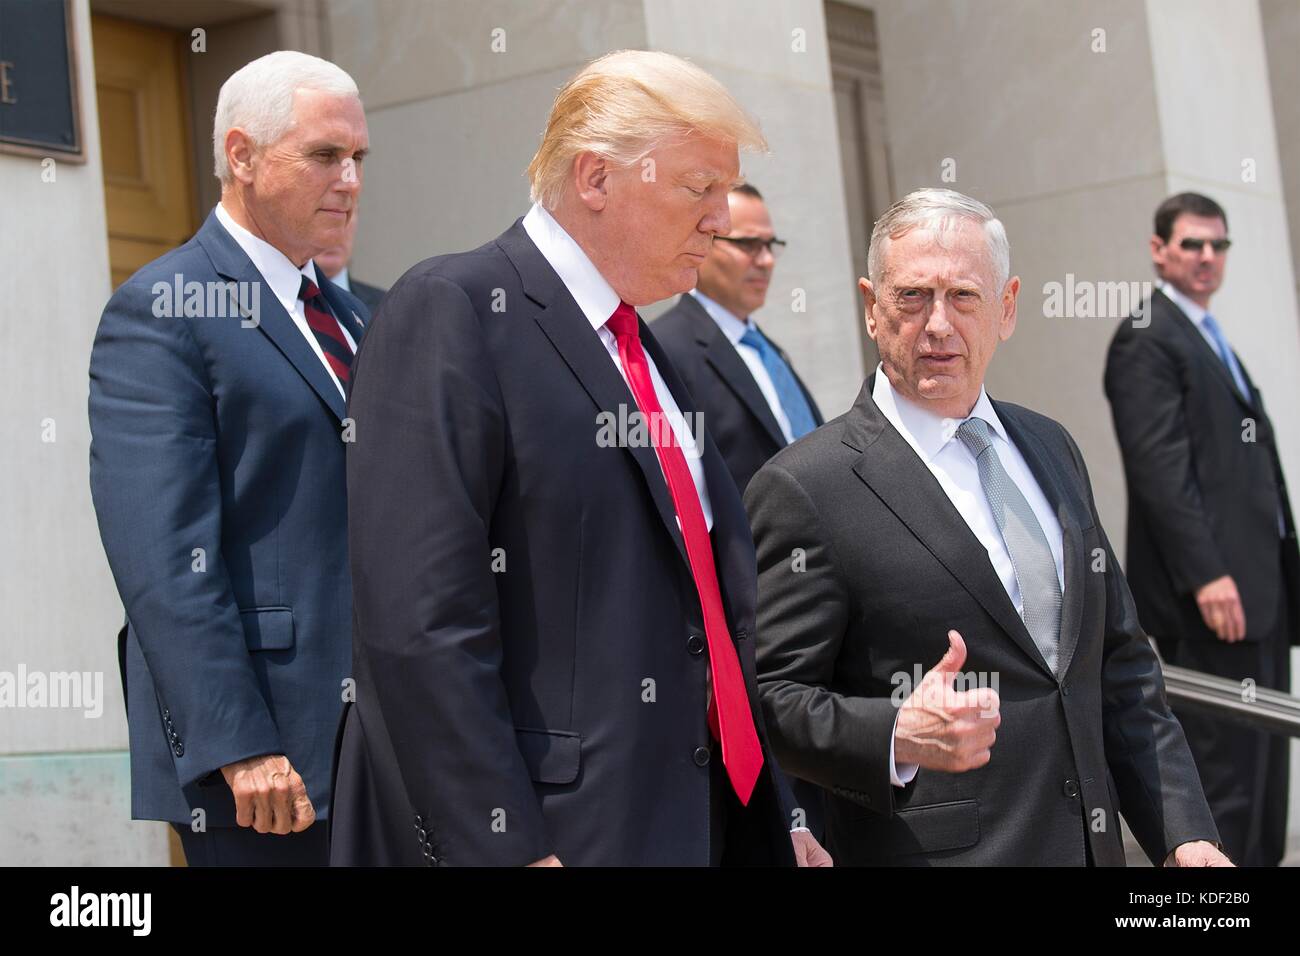 U.S. Vice President Mike Pence, U.S. President Donald Trump and U.S. Defense Secretary James Mattis leave the Pentagon after a meeting of the National Security Council July 20, 2017 in Washington, DC.   (photo by Dominique A. Pineiro via Planetpix) Stock Photo